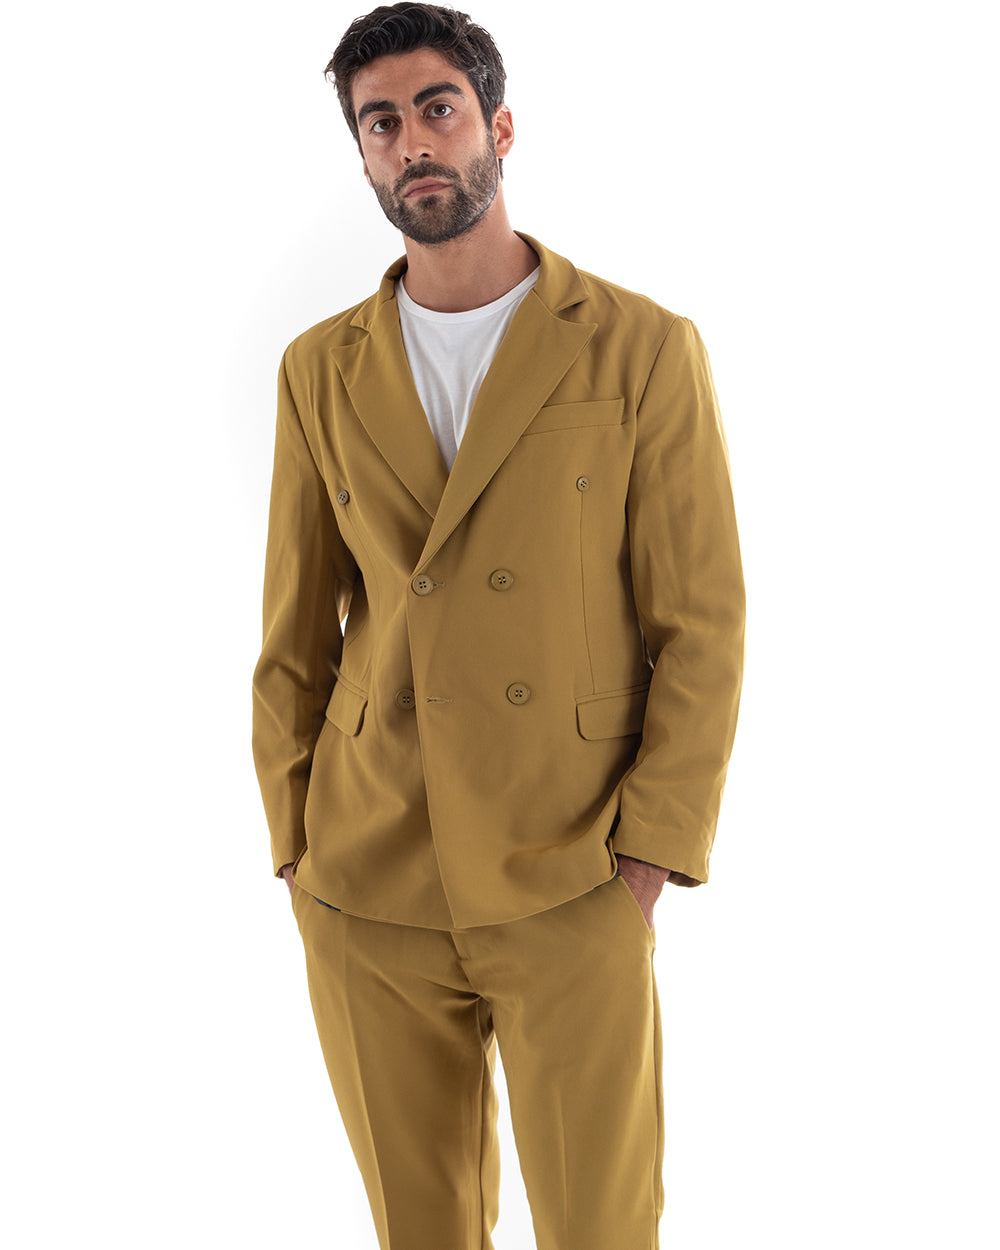 Double-Breasted Men's Suit Viscose Suit Jacket Pants Mustard Elegant Ceremony GIOSAL-OU2168A